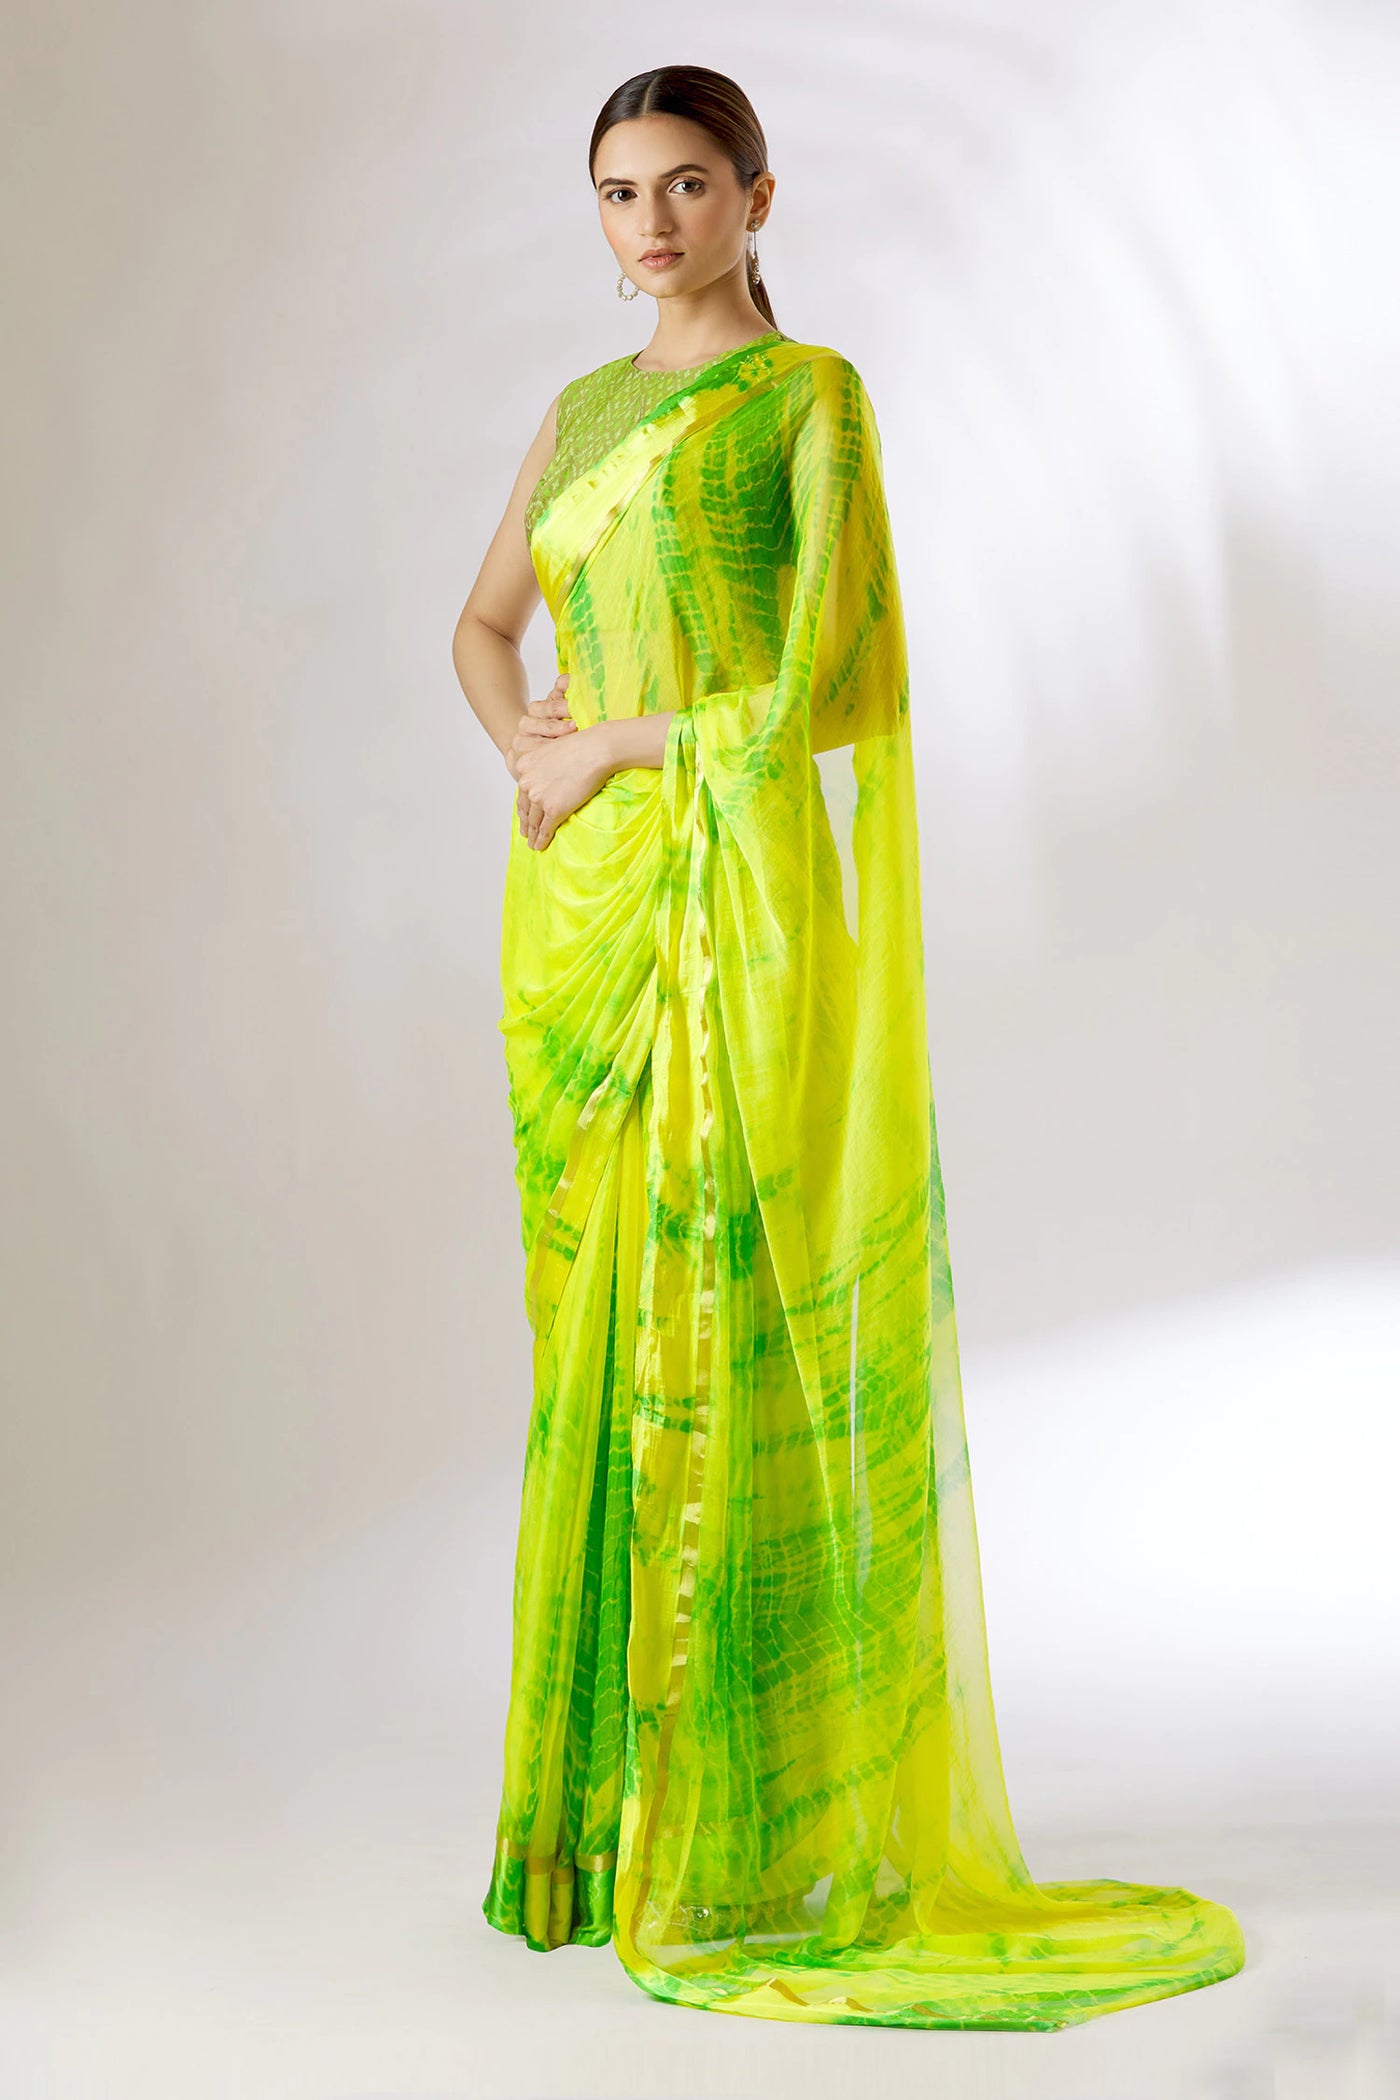 Yellow Tie-Dye Saree - Indian Clothing in Denver, CO, Aurora, CO, Boulder, CO, Fort Collins, CO, Colorado Springs, CO, Parker, CO, Highlands Ranch, CO, Cherry Creek, CO, Centennial, CO, and Longmont, CO. Nationwide shipping USA - India Fashion X